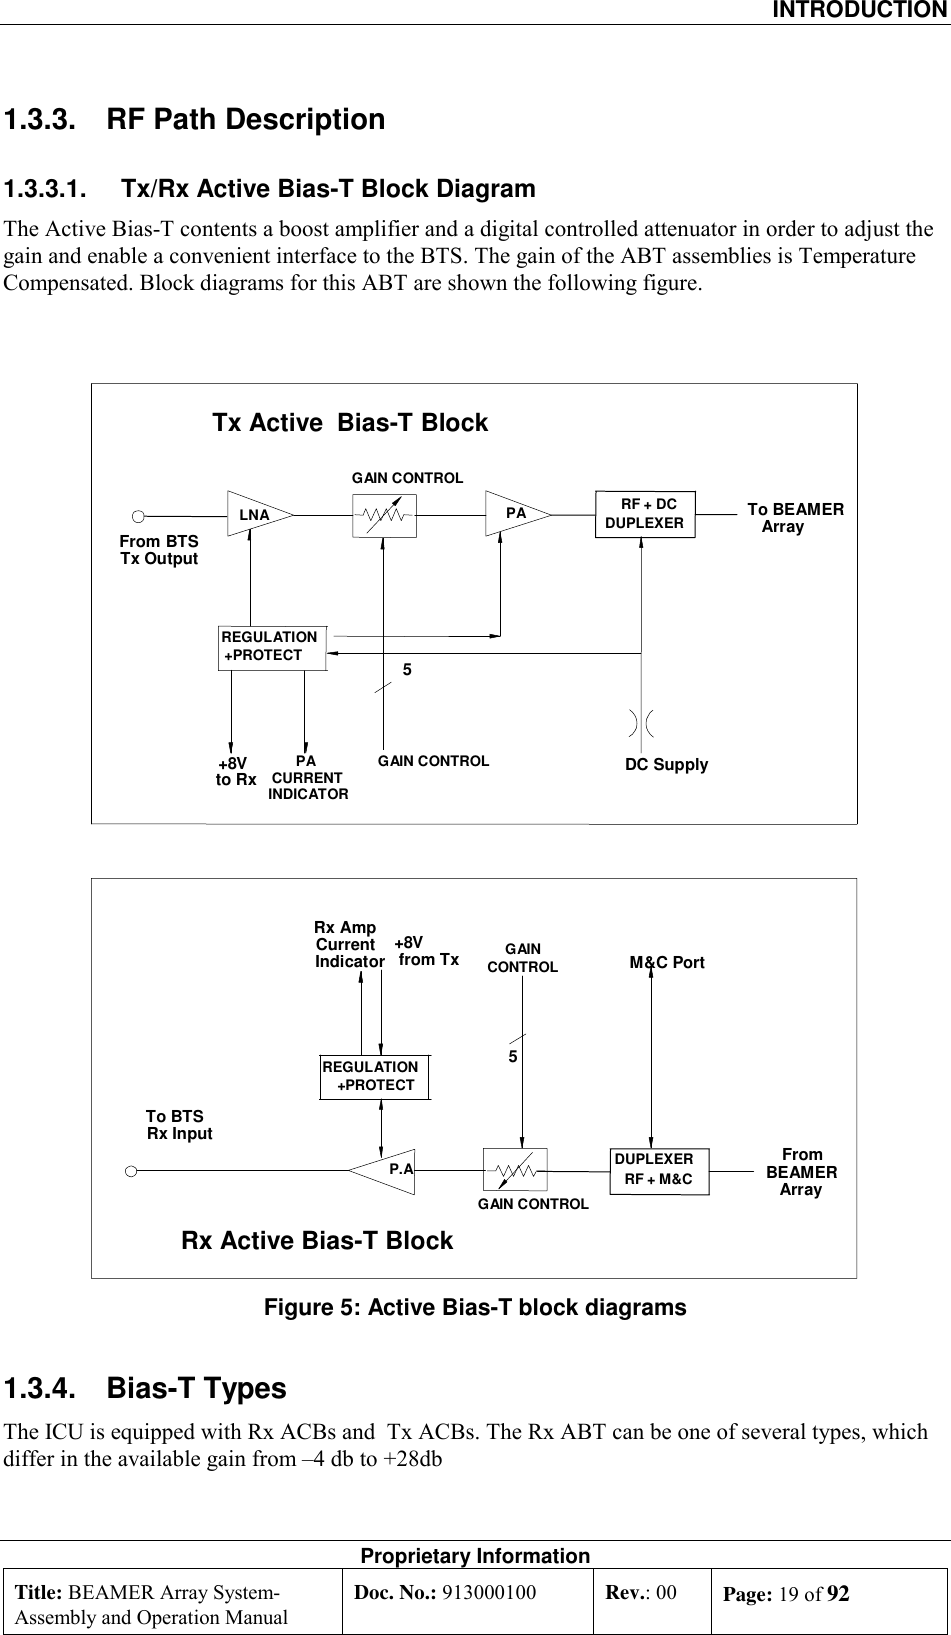  INTRODUCTION Proprietary Information Title: BEAMER Array System- Assembly and Operation Manual Doc. No.: 913000100  Rev.: 00  Page: 19 of 92  1.3.3.  RF Path Description 1.3.3.1.  Tx/Rx Active Bias-T Block Diagram   The Active Bias-T contents a boost amplifier and a digital controlled attenuator in order to adjust the gain and enable a convenient interface to the BTS. The gain of the ABT assemblies is Temperature Compensated. Block diagrams for this ABT are shown the following figure. REGULATION +PROTECT PA LNA GAIN CONTROL DUPLEXER PA CURRENT INDICATOR GAIN CONTROL5 DC SupplyRF + DC +8V to Rx From BTS Tx Output  To BEAMER Array Tx Active Bias-T Block Rx Active Bias-T BlockP.A GAIN CONTROL From BEAMER Array RF + M&amp;C DUPLEXER +8V from Tx Rx Amp CurrentIndicator  GAINCONTROL 5M&amp;C PortREGULATION +PROTECT To BTS Rx Input Figure 5: Active Bias-T block diagrams 1.3.4.  Bias-T Types  The ICU is equipped with Rx ACBs and  Tx ACBs. The Rx ABT can be one of several types, which differ in the available gain from –4 db to +28db 